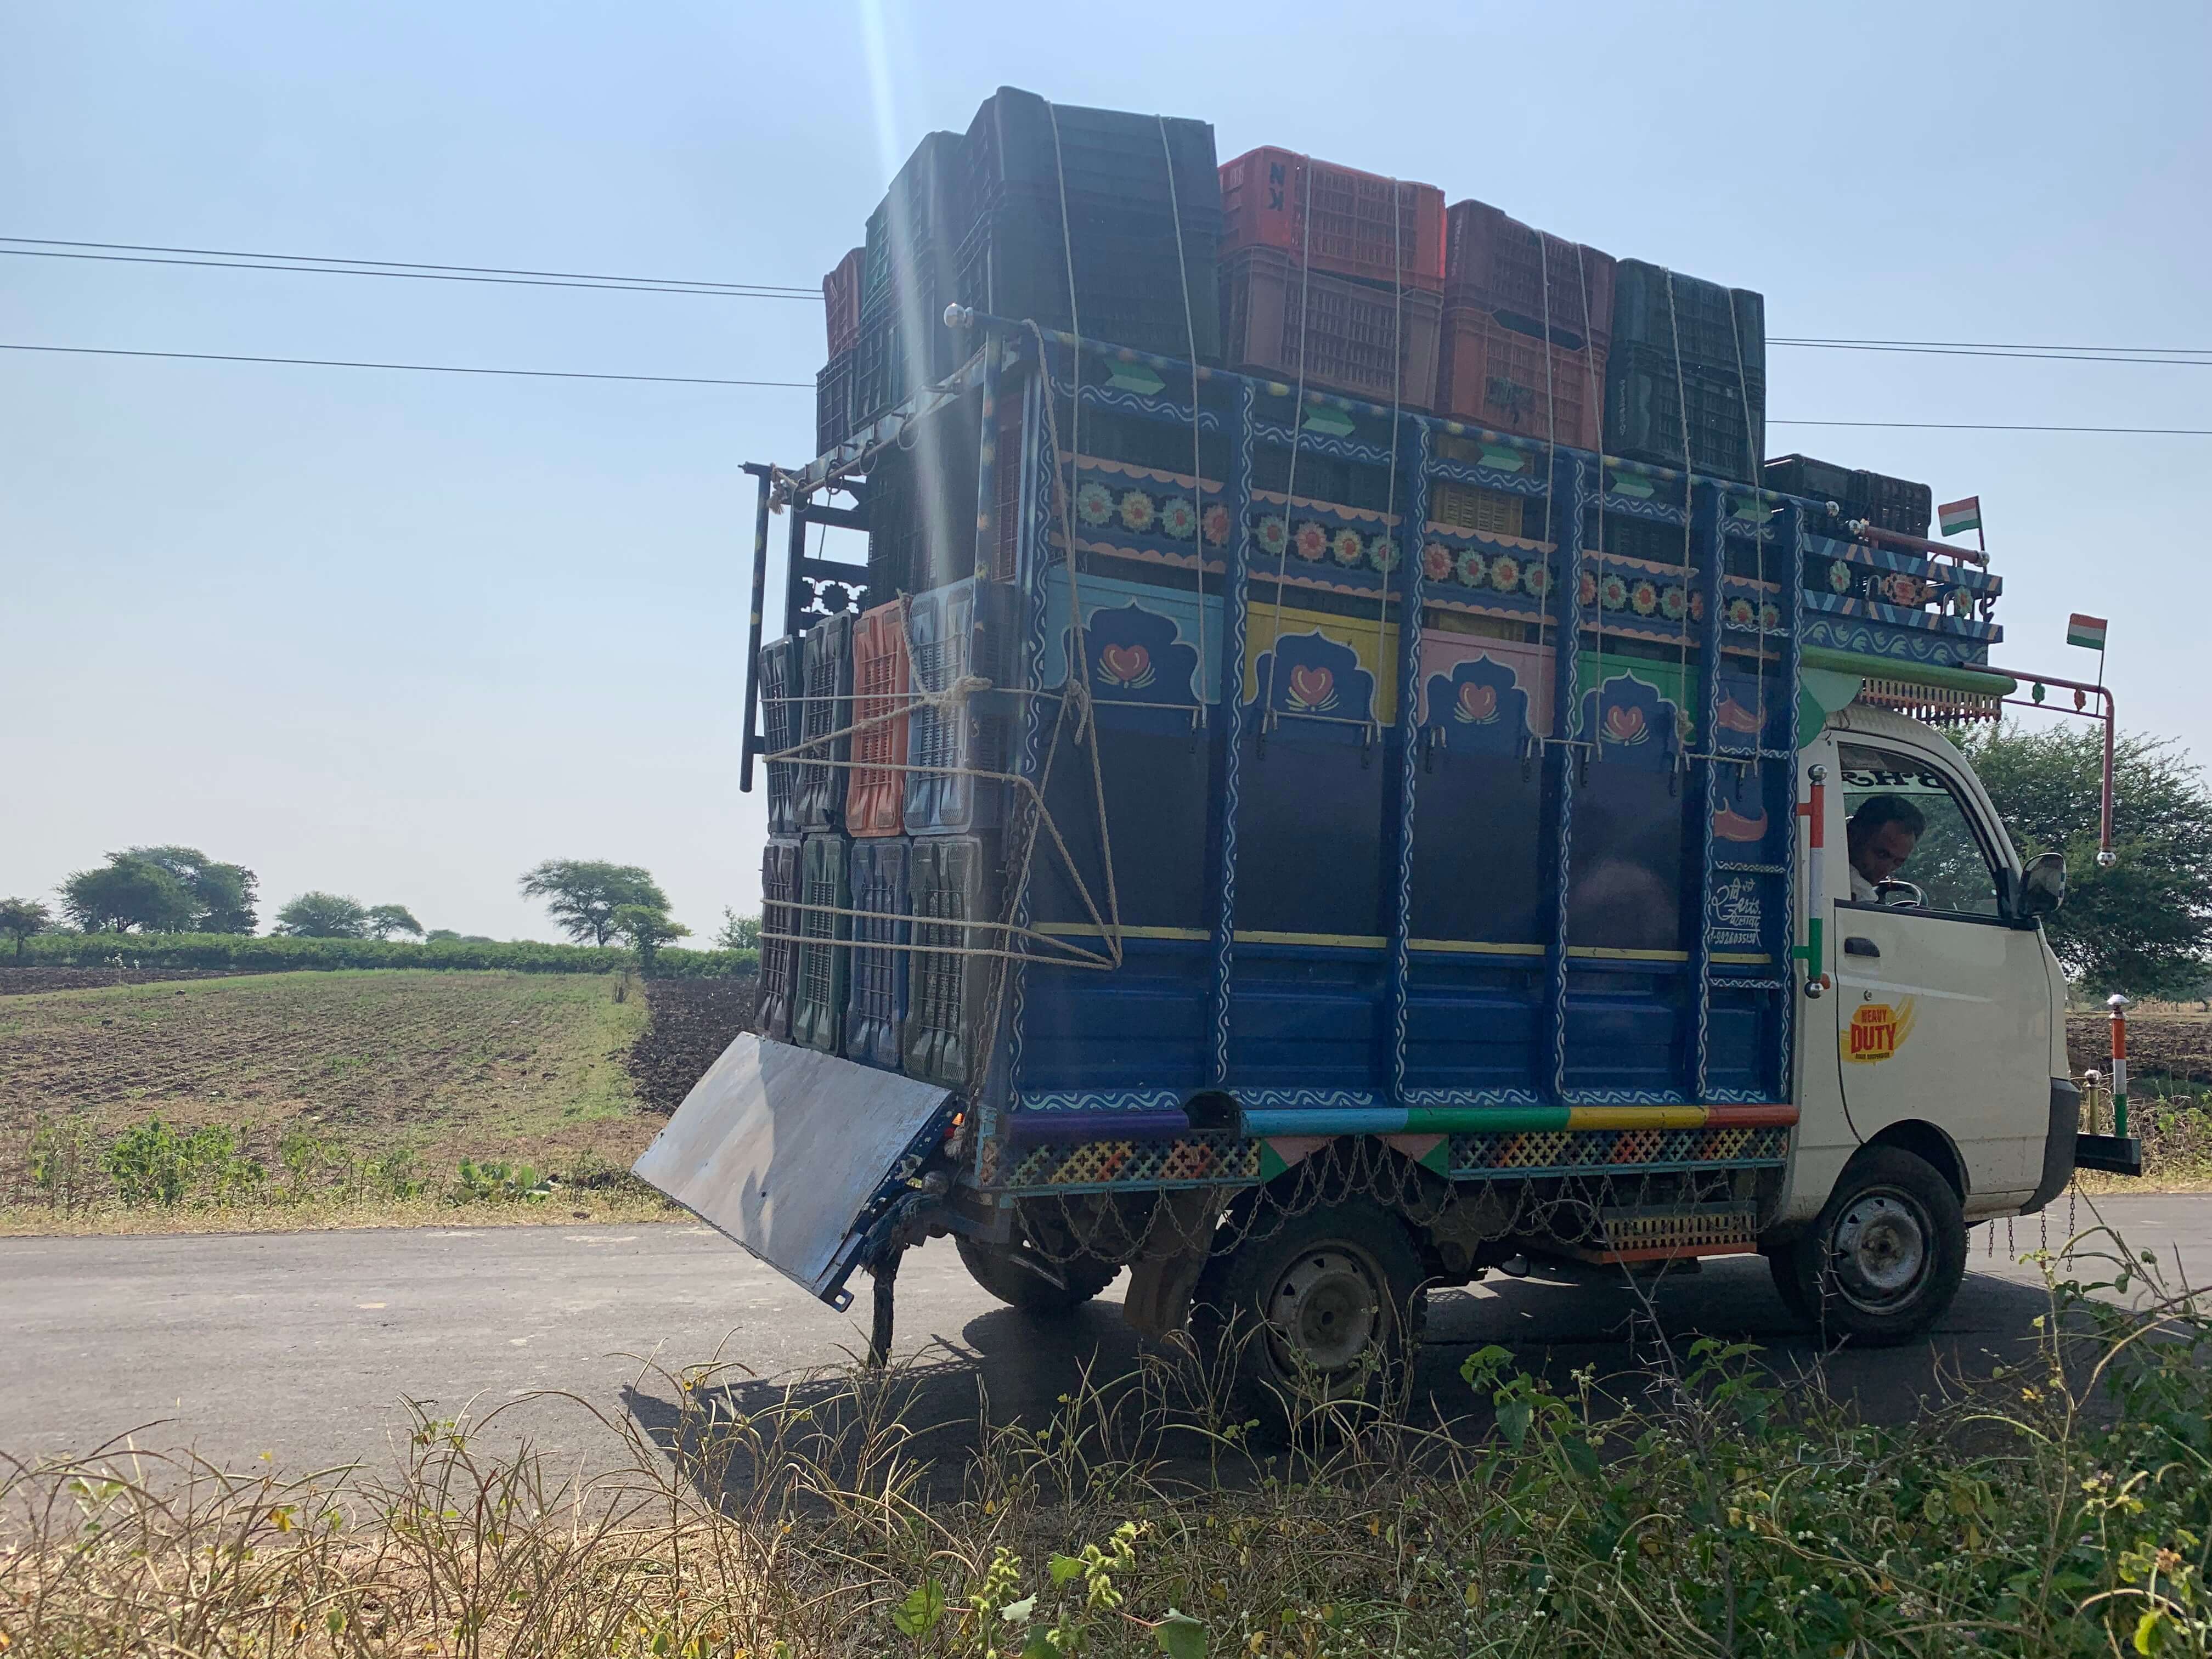 Sometimes, the intermediaries provide carrying crates to farmers and arrange pick-up at the farm gate to take harvest for further selling in mandis.